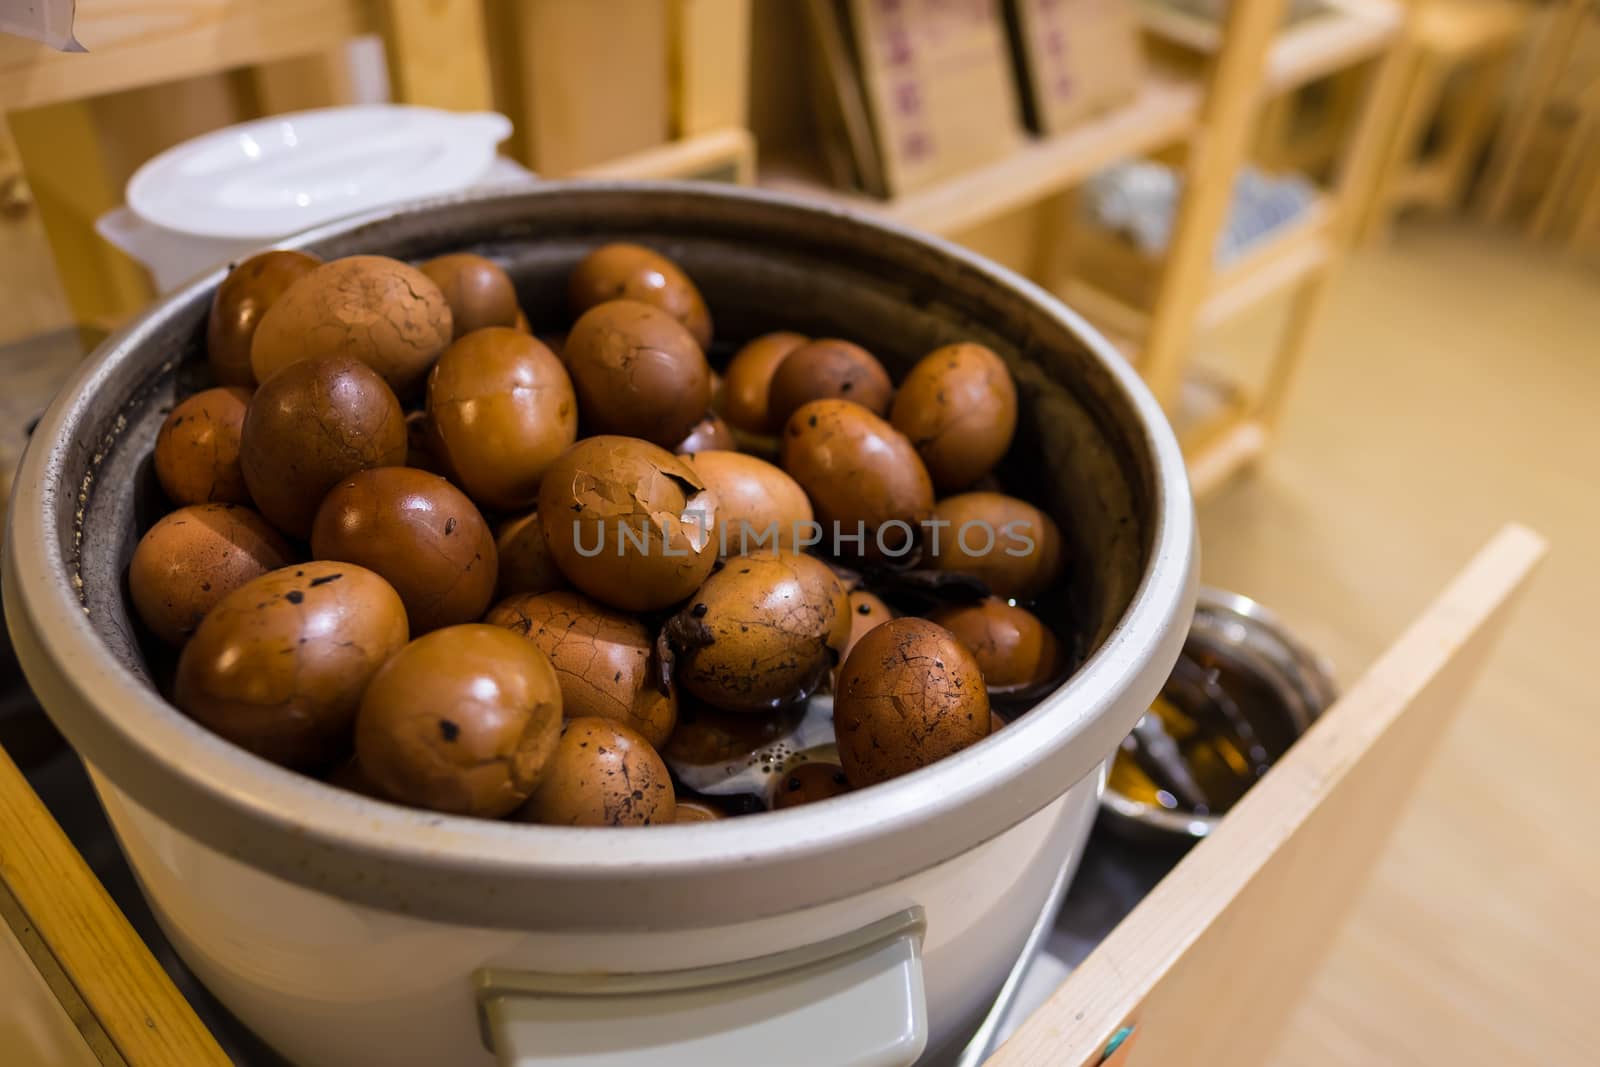 Tradional chinese herbal eggs in a big cooking pot for sale